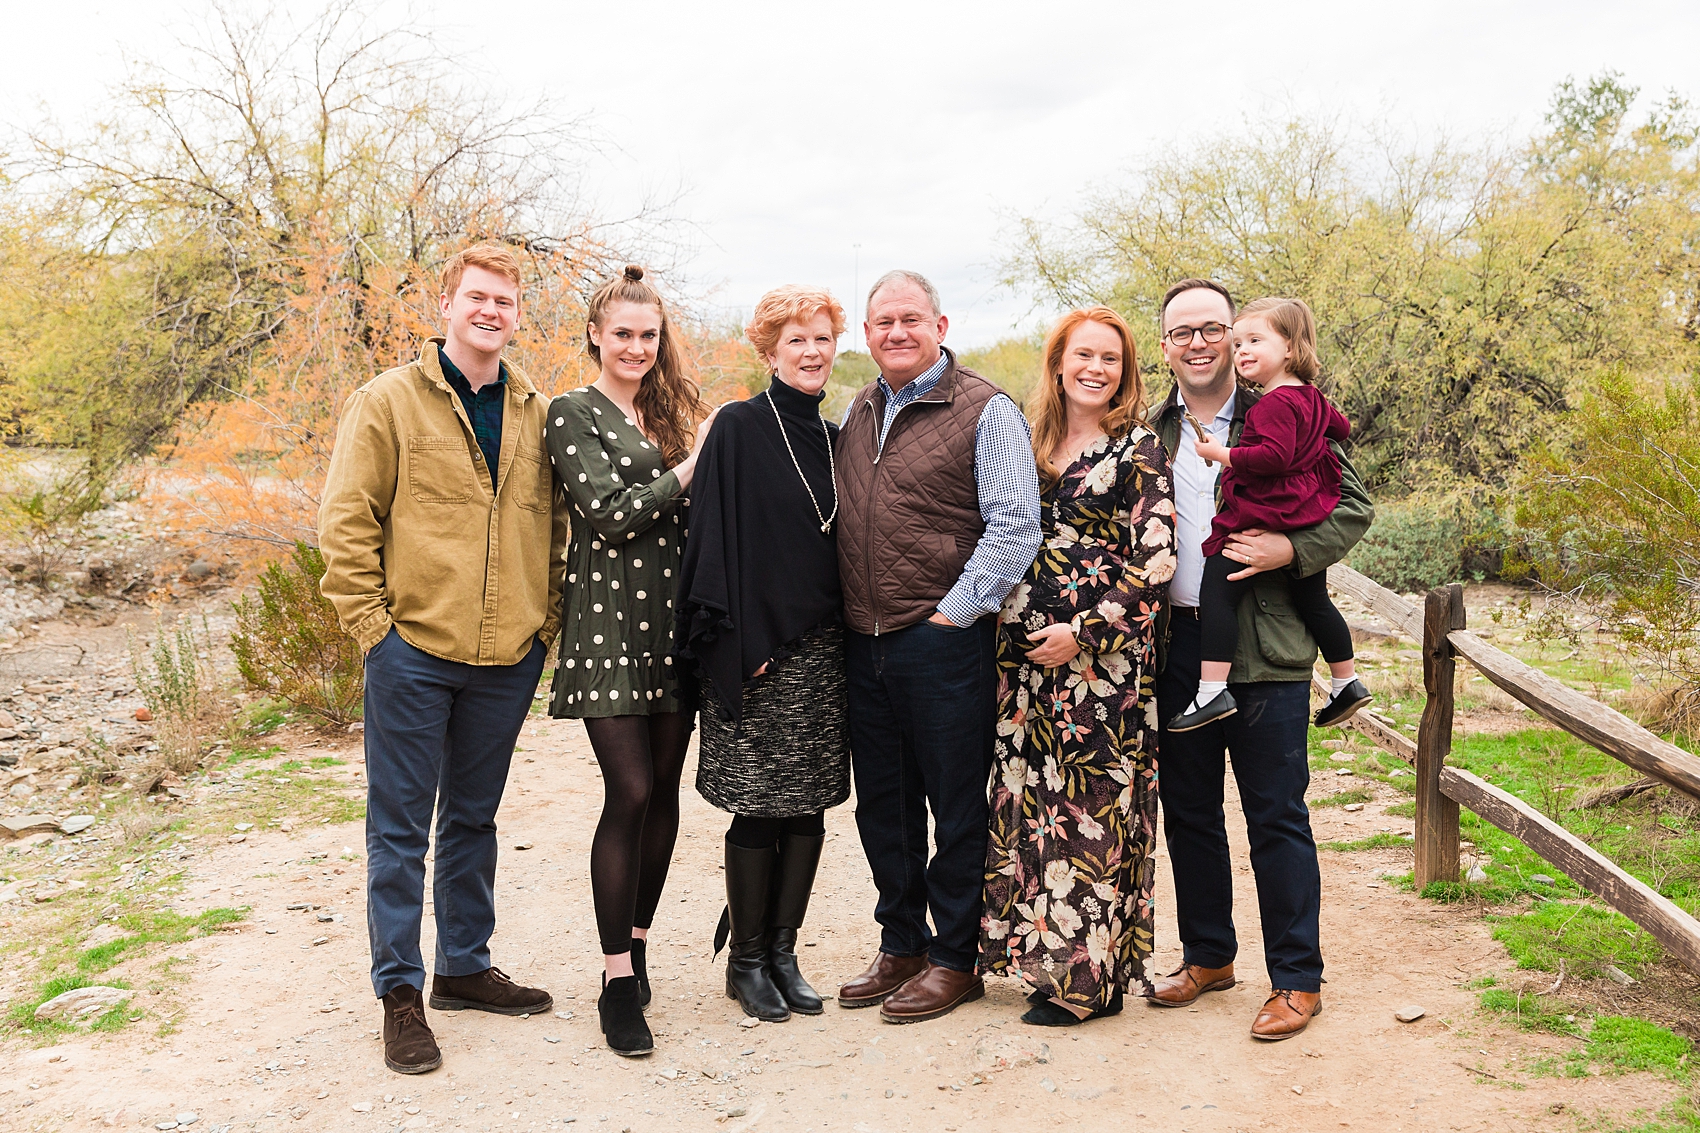 Leah Hope Photography | Scottsdale Phoenix Arizona | Desert Landscape Scenery | Dreamy Draw Recreation Park | Extended Family Photos | Family Pictures | What to Wear | Family Poses